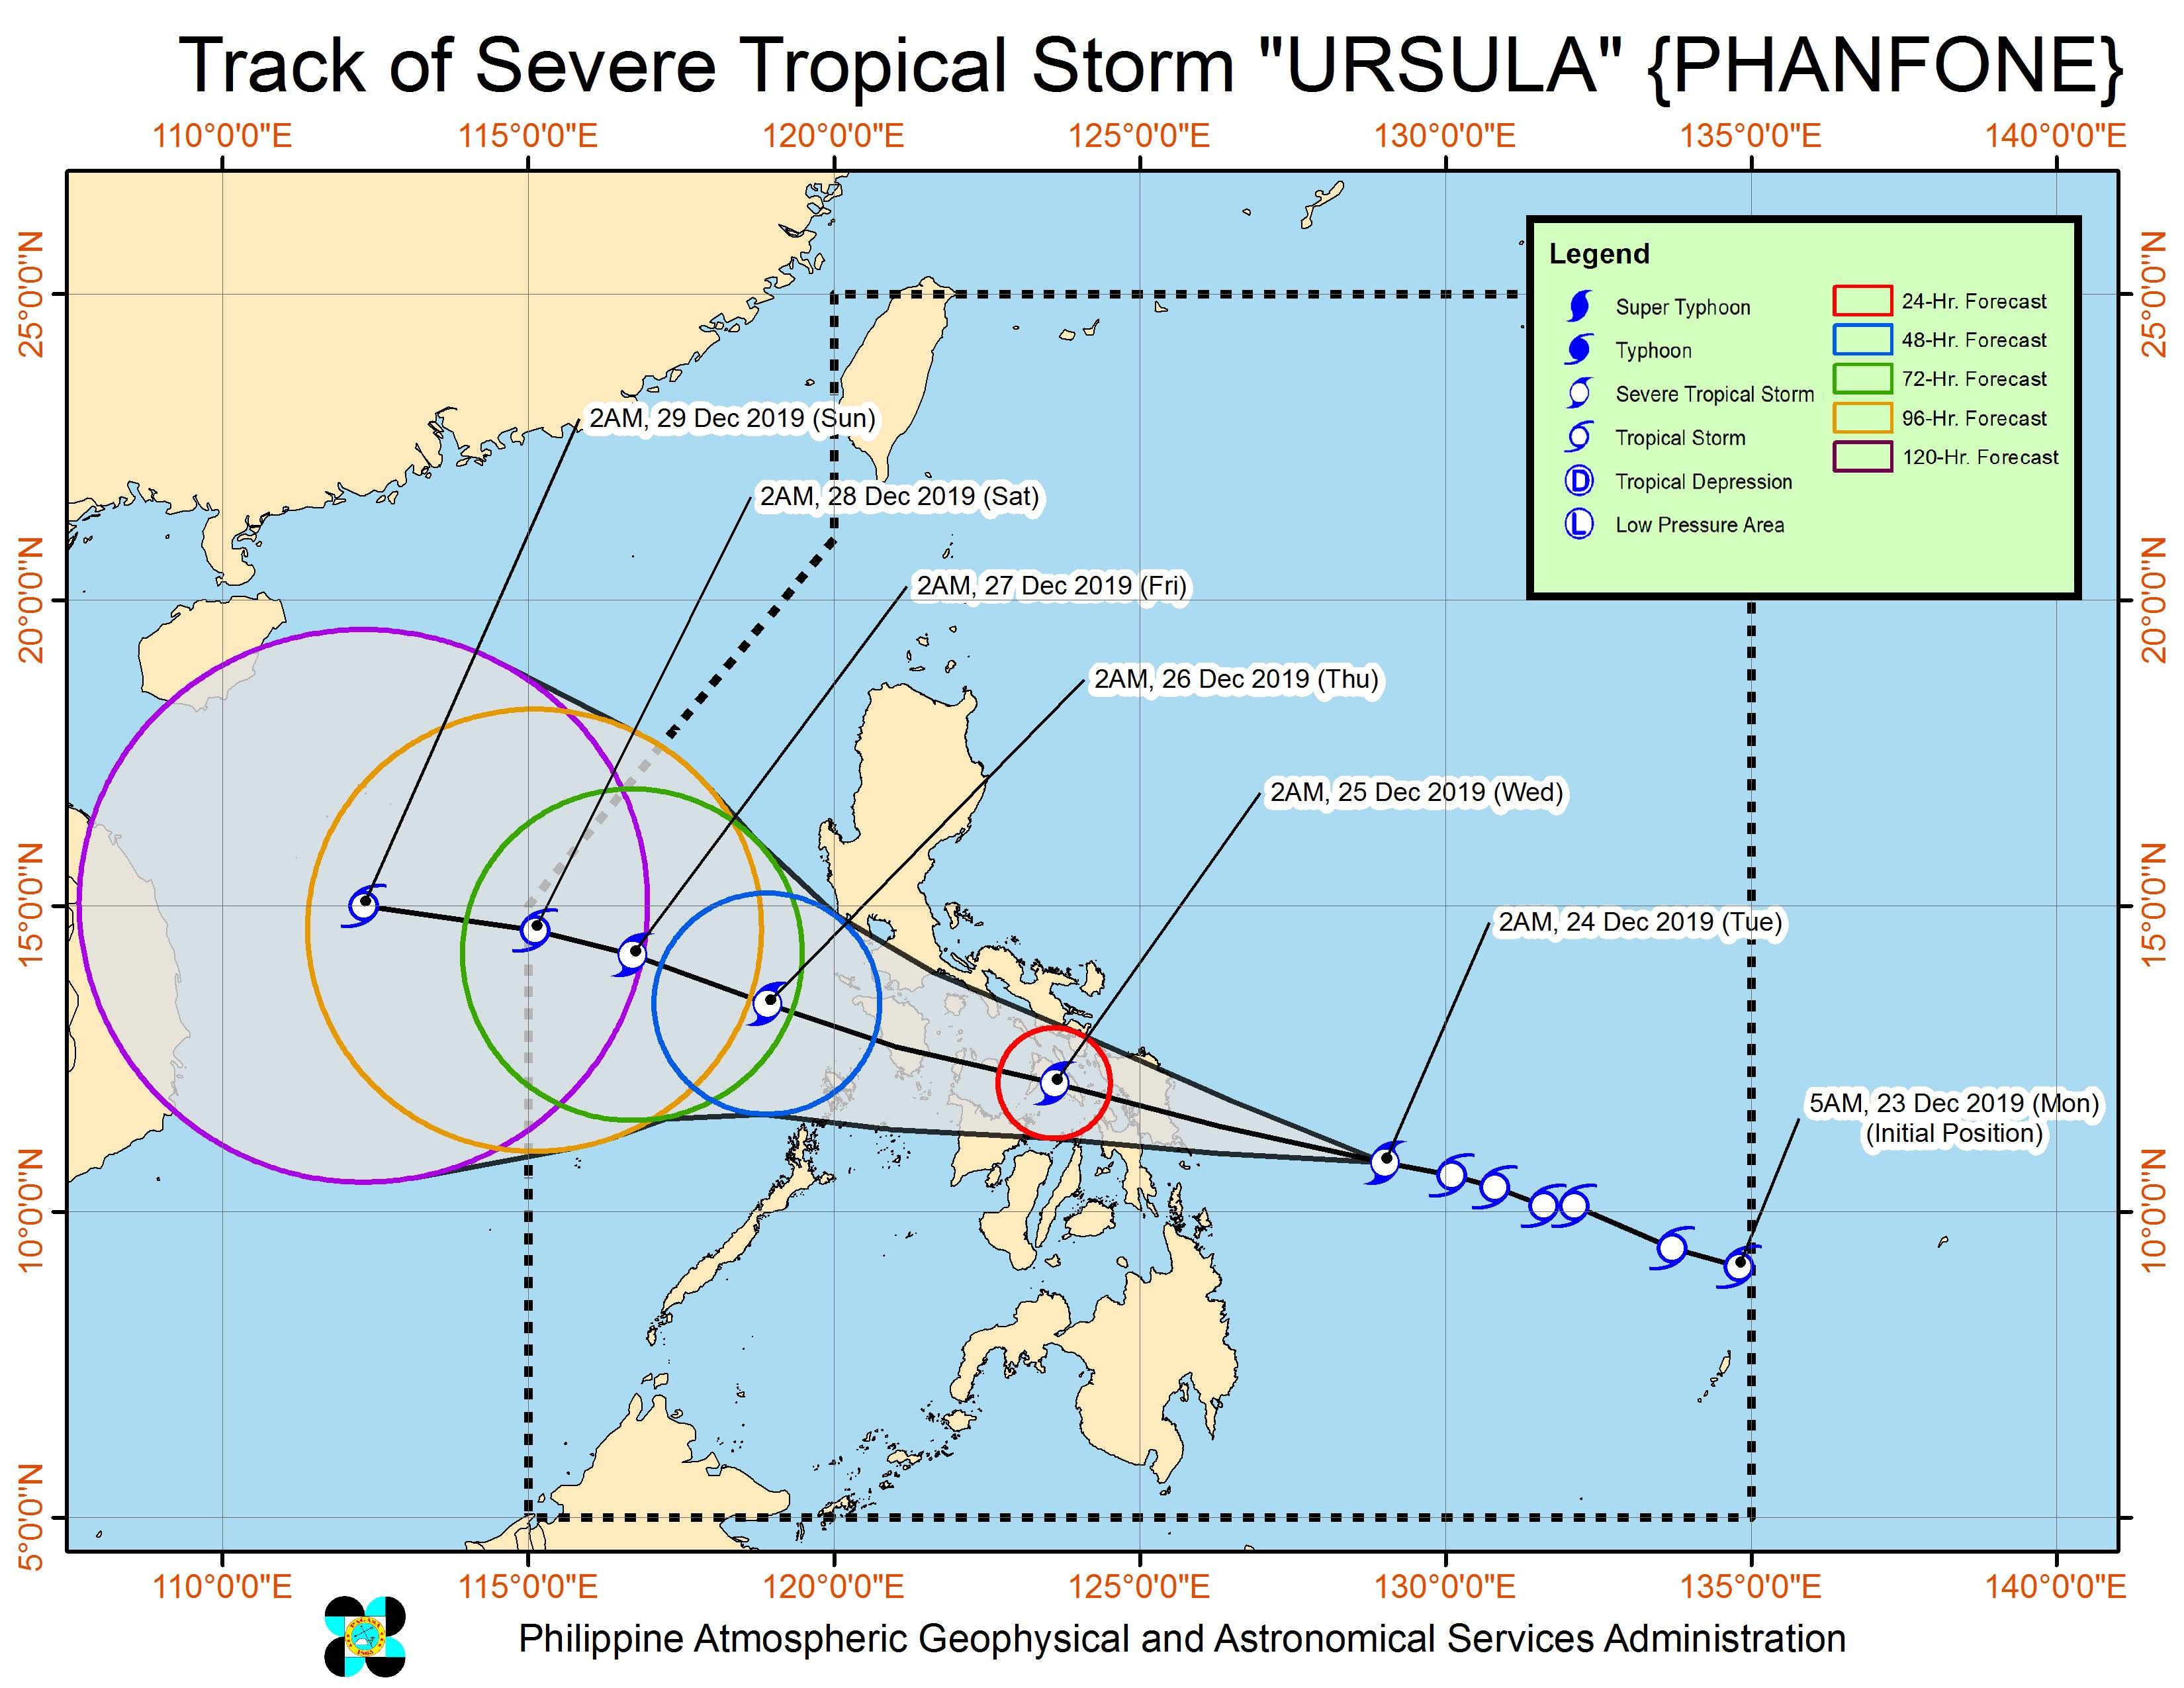 Forecast track of Severe Tropical Storm Ursula (Phanfone) as of December 24, 2019, 5 am. Image from PAGASA 